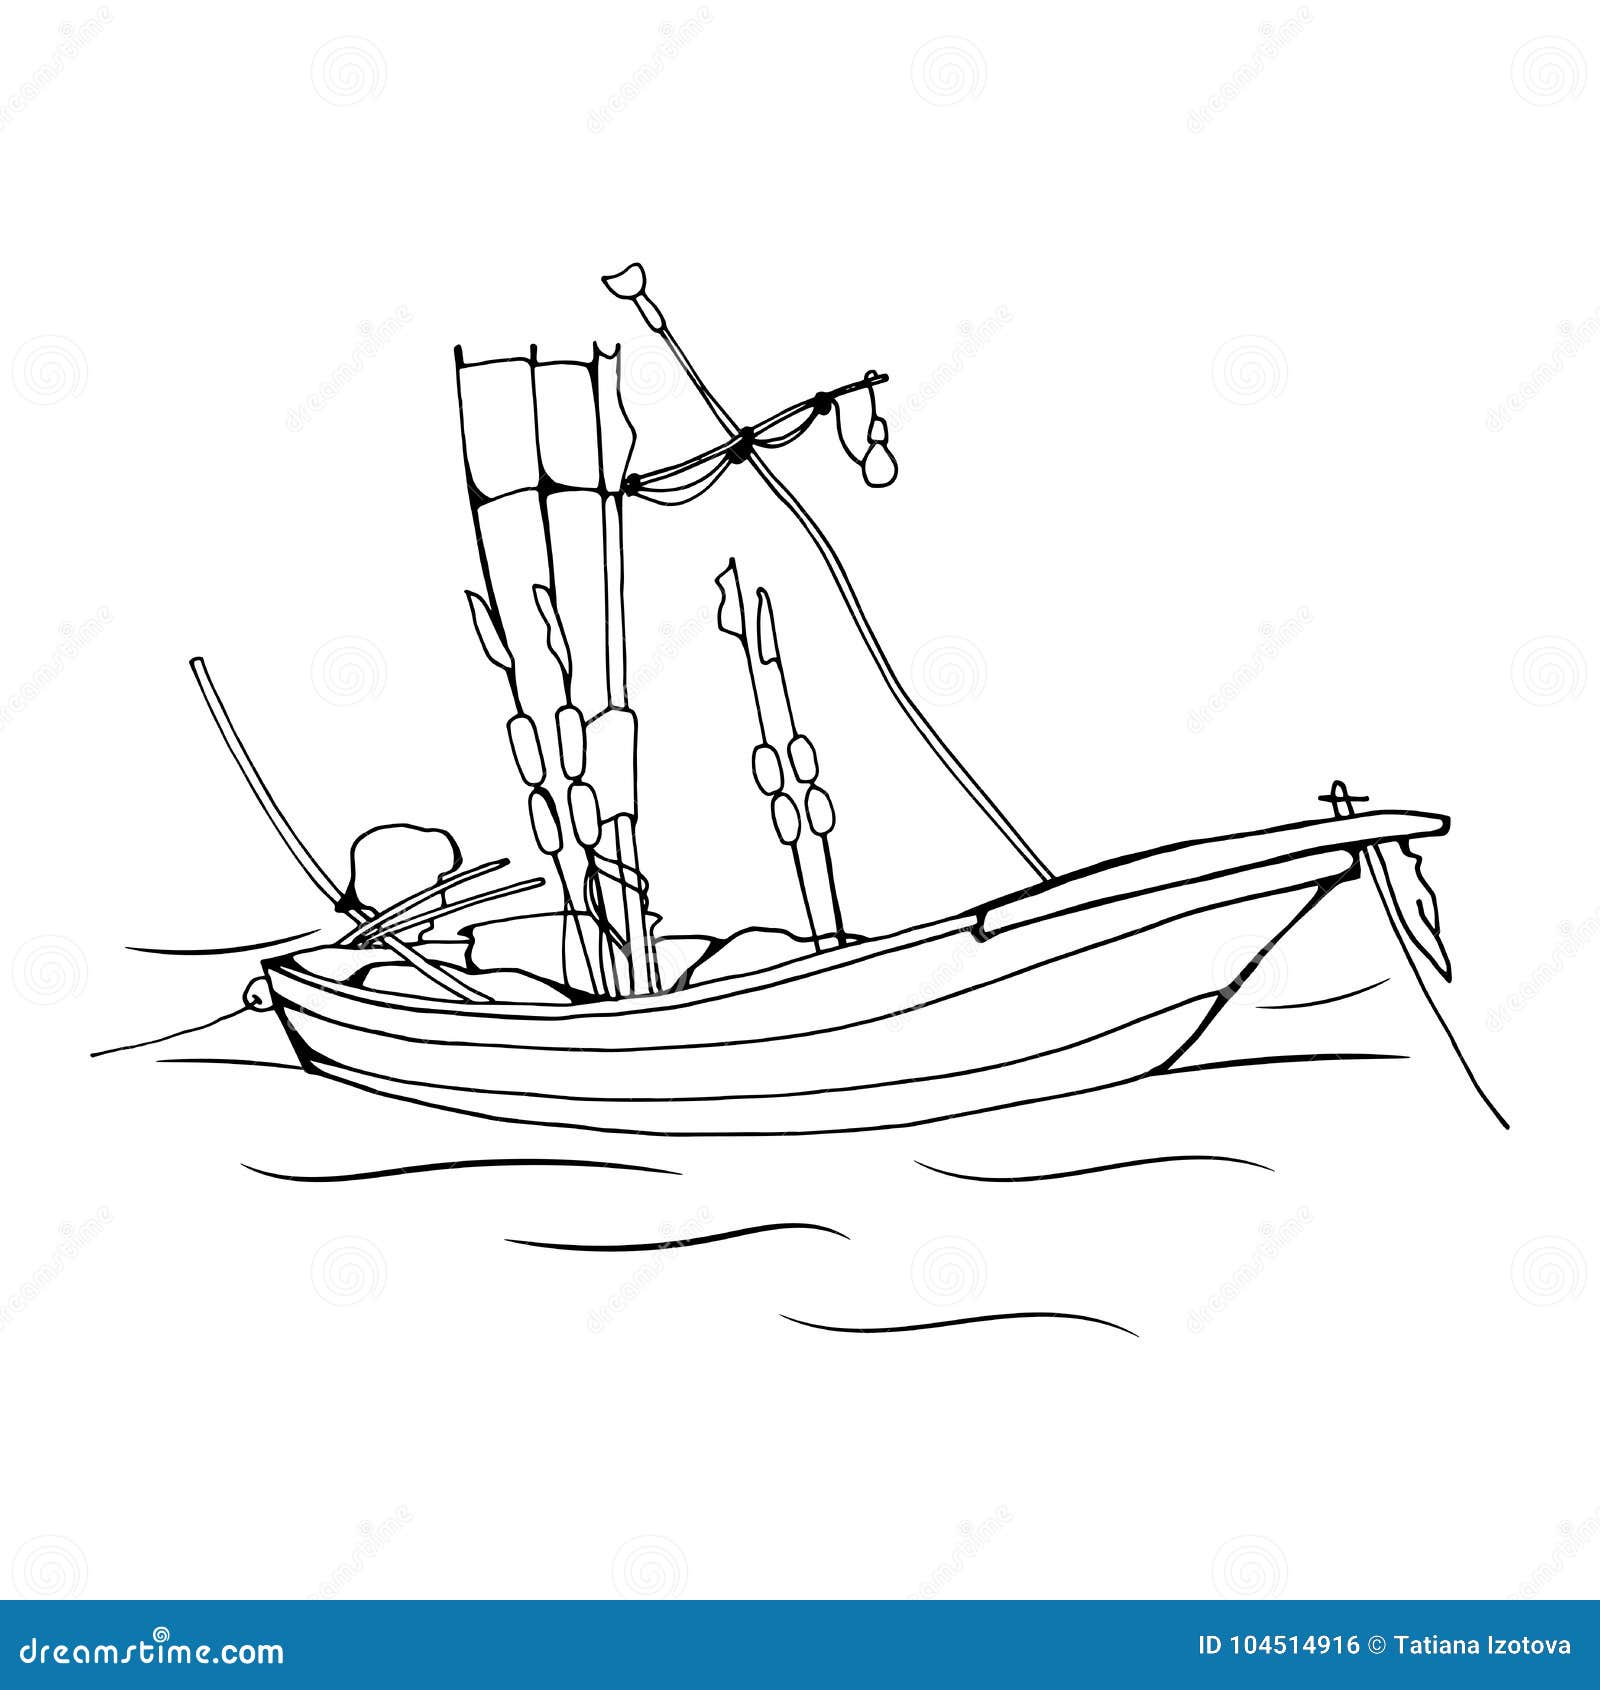 Realistic Sketch of a Small Fishing Boat on a White Background